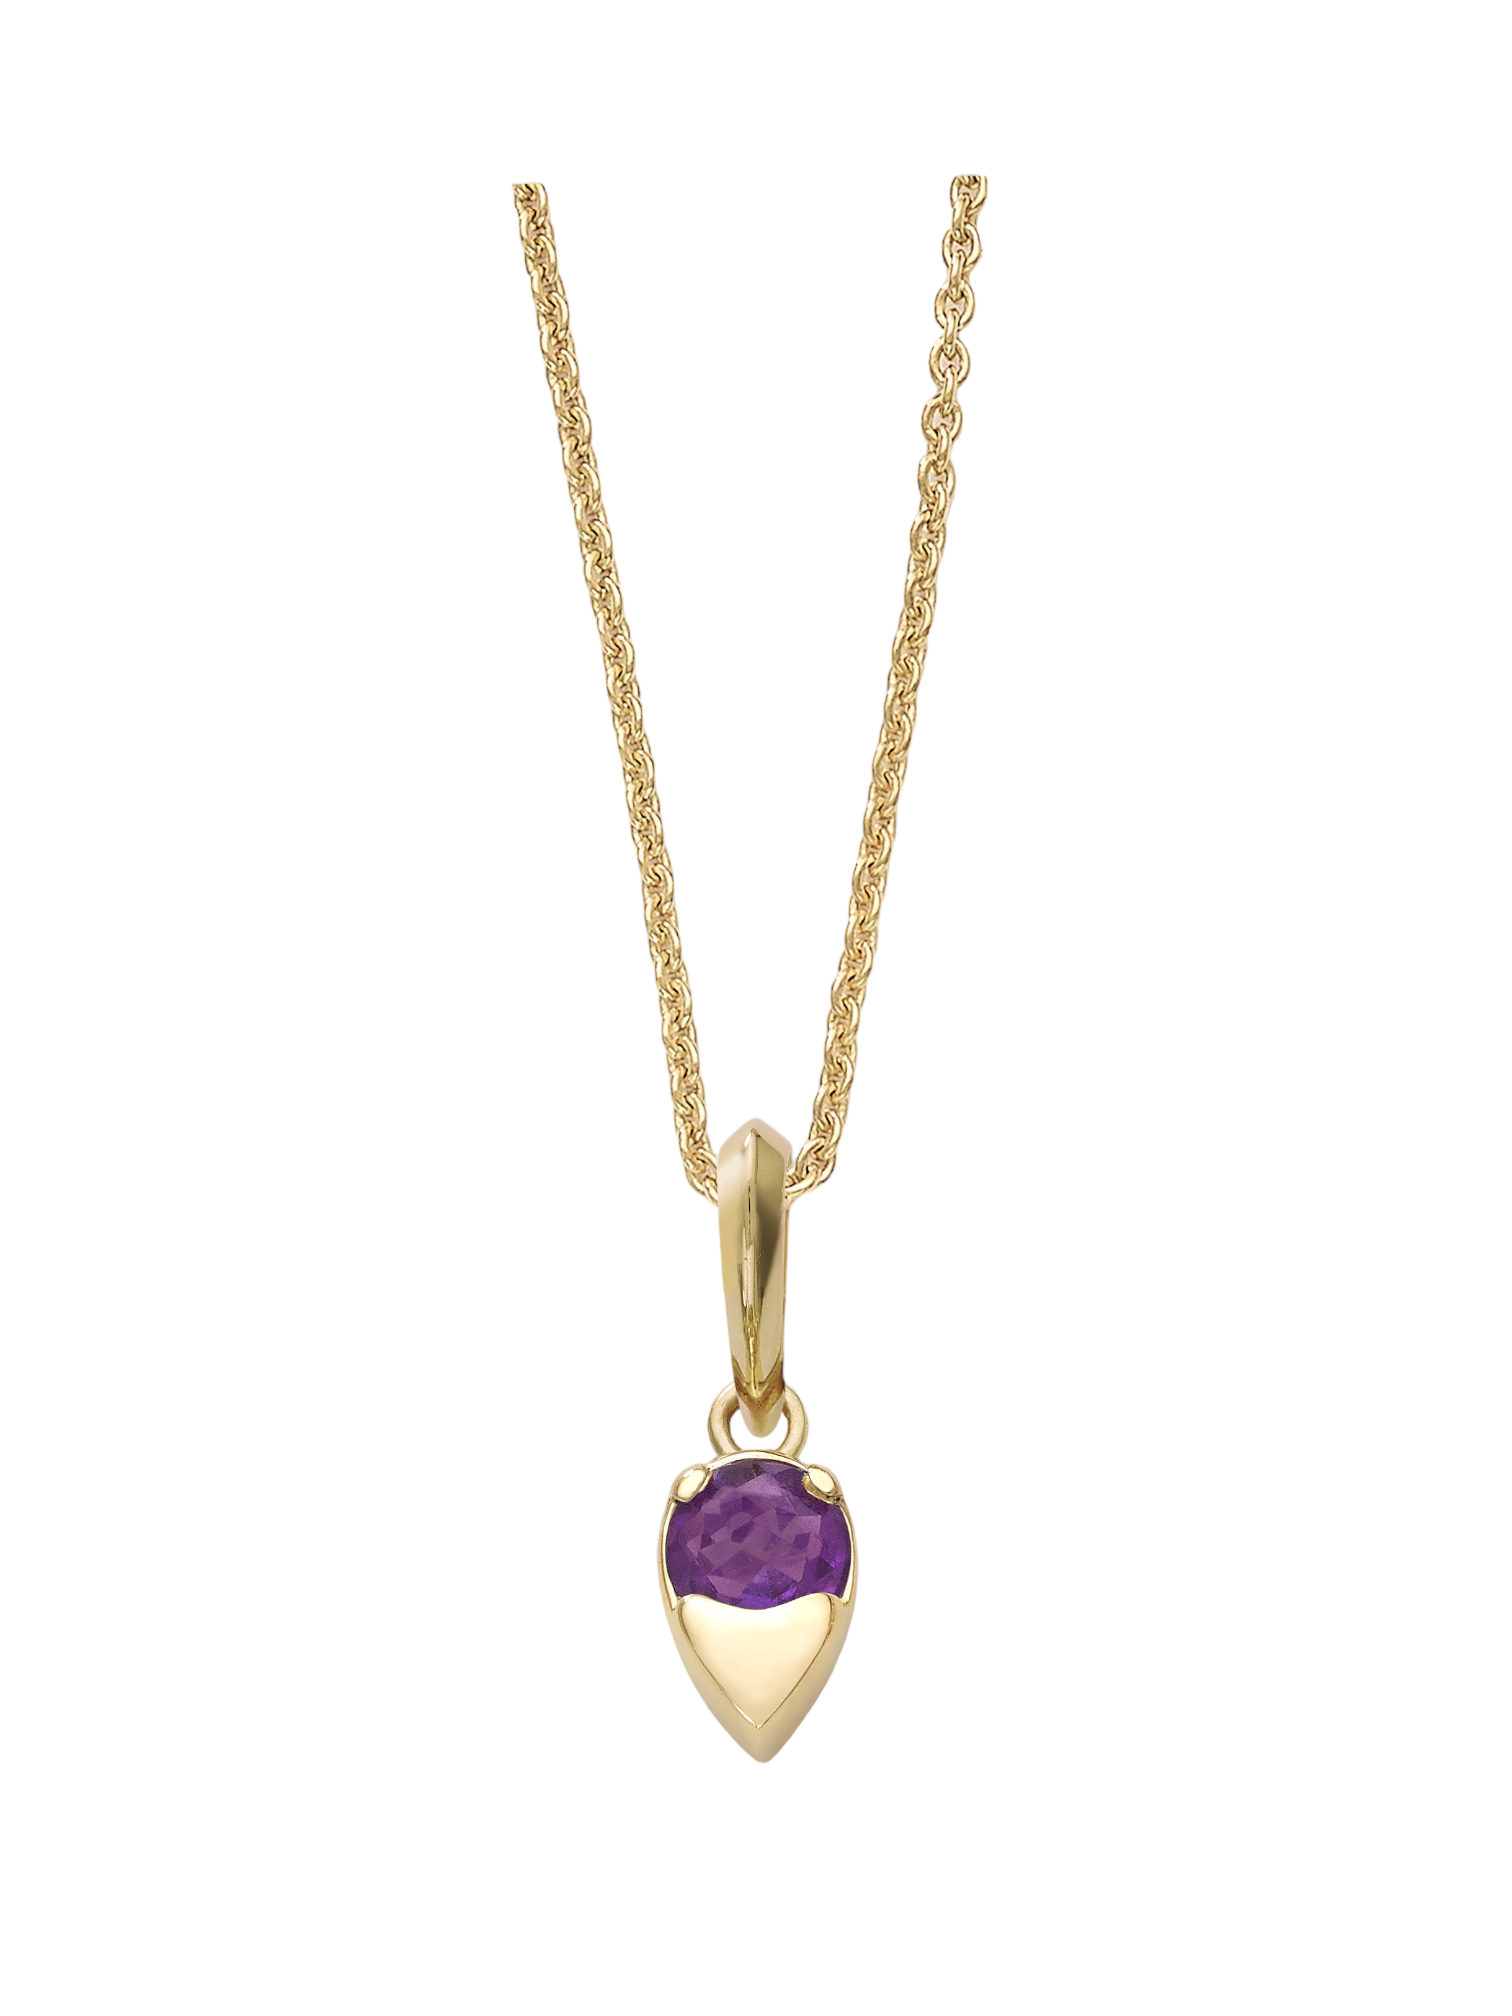 The Birthstone Pendant (Collection) House of Devam